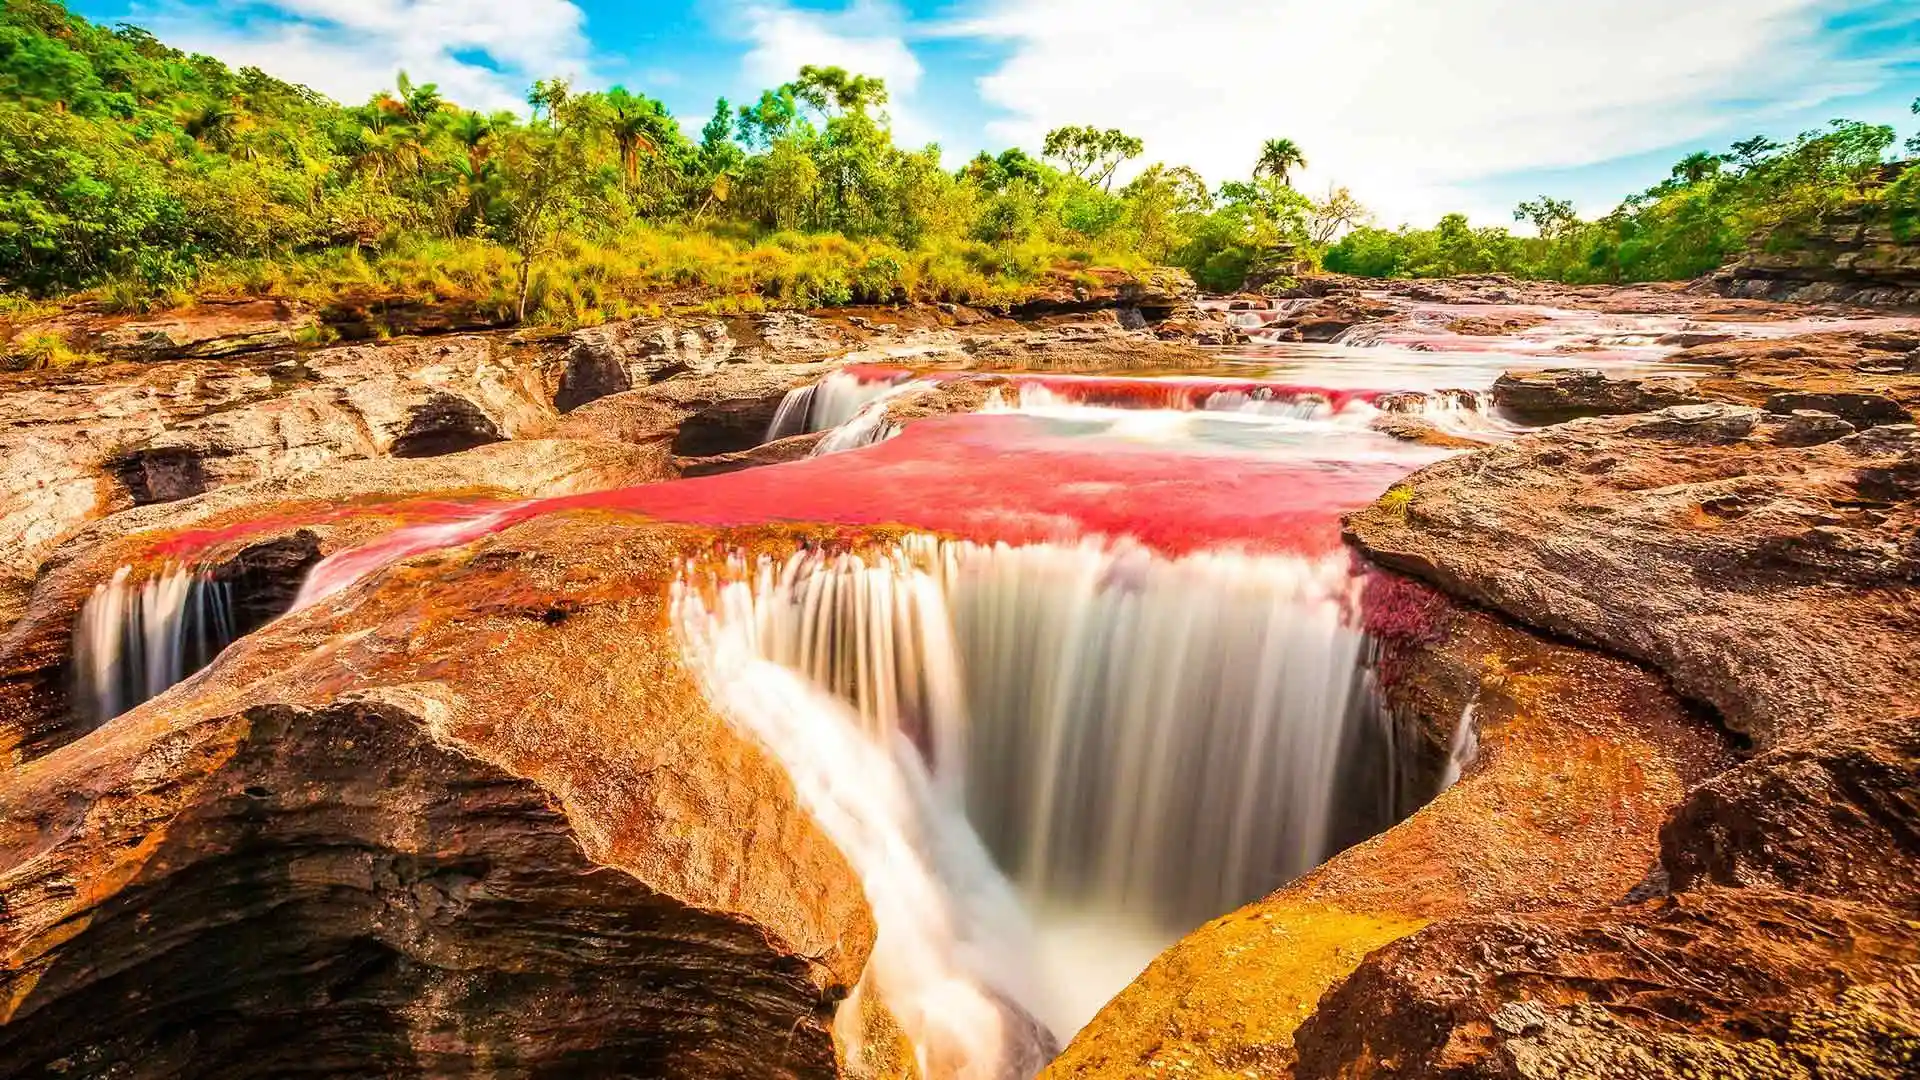 Cano Cristales, The River Of 5 Colors